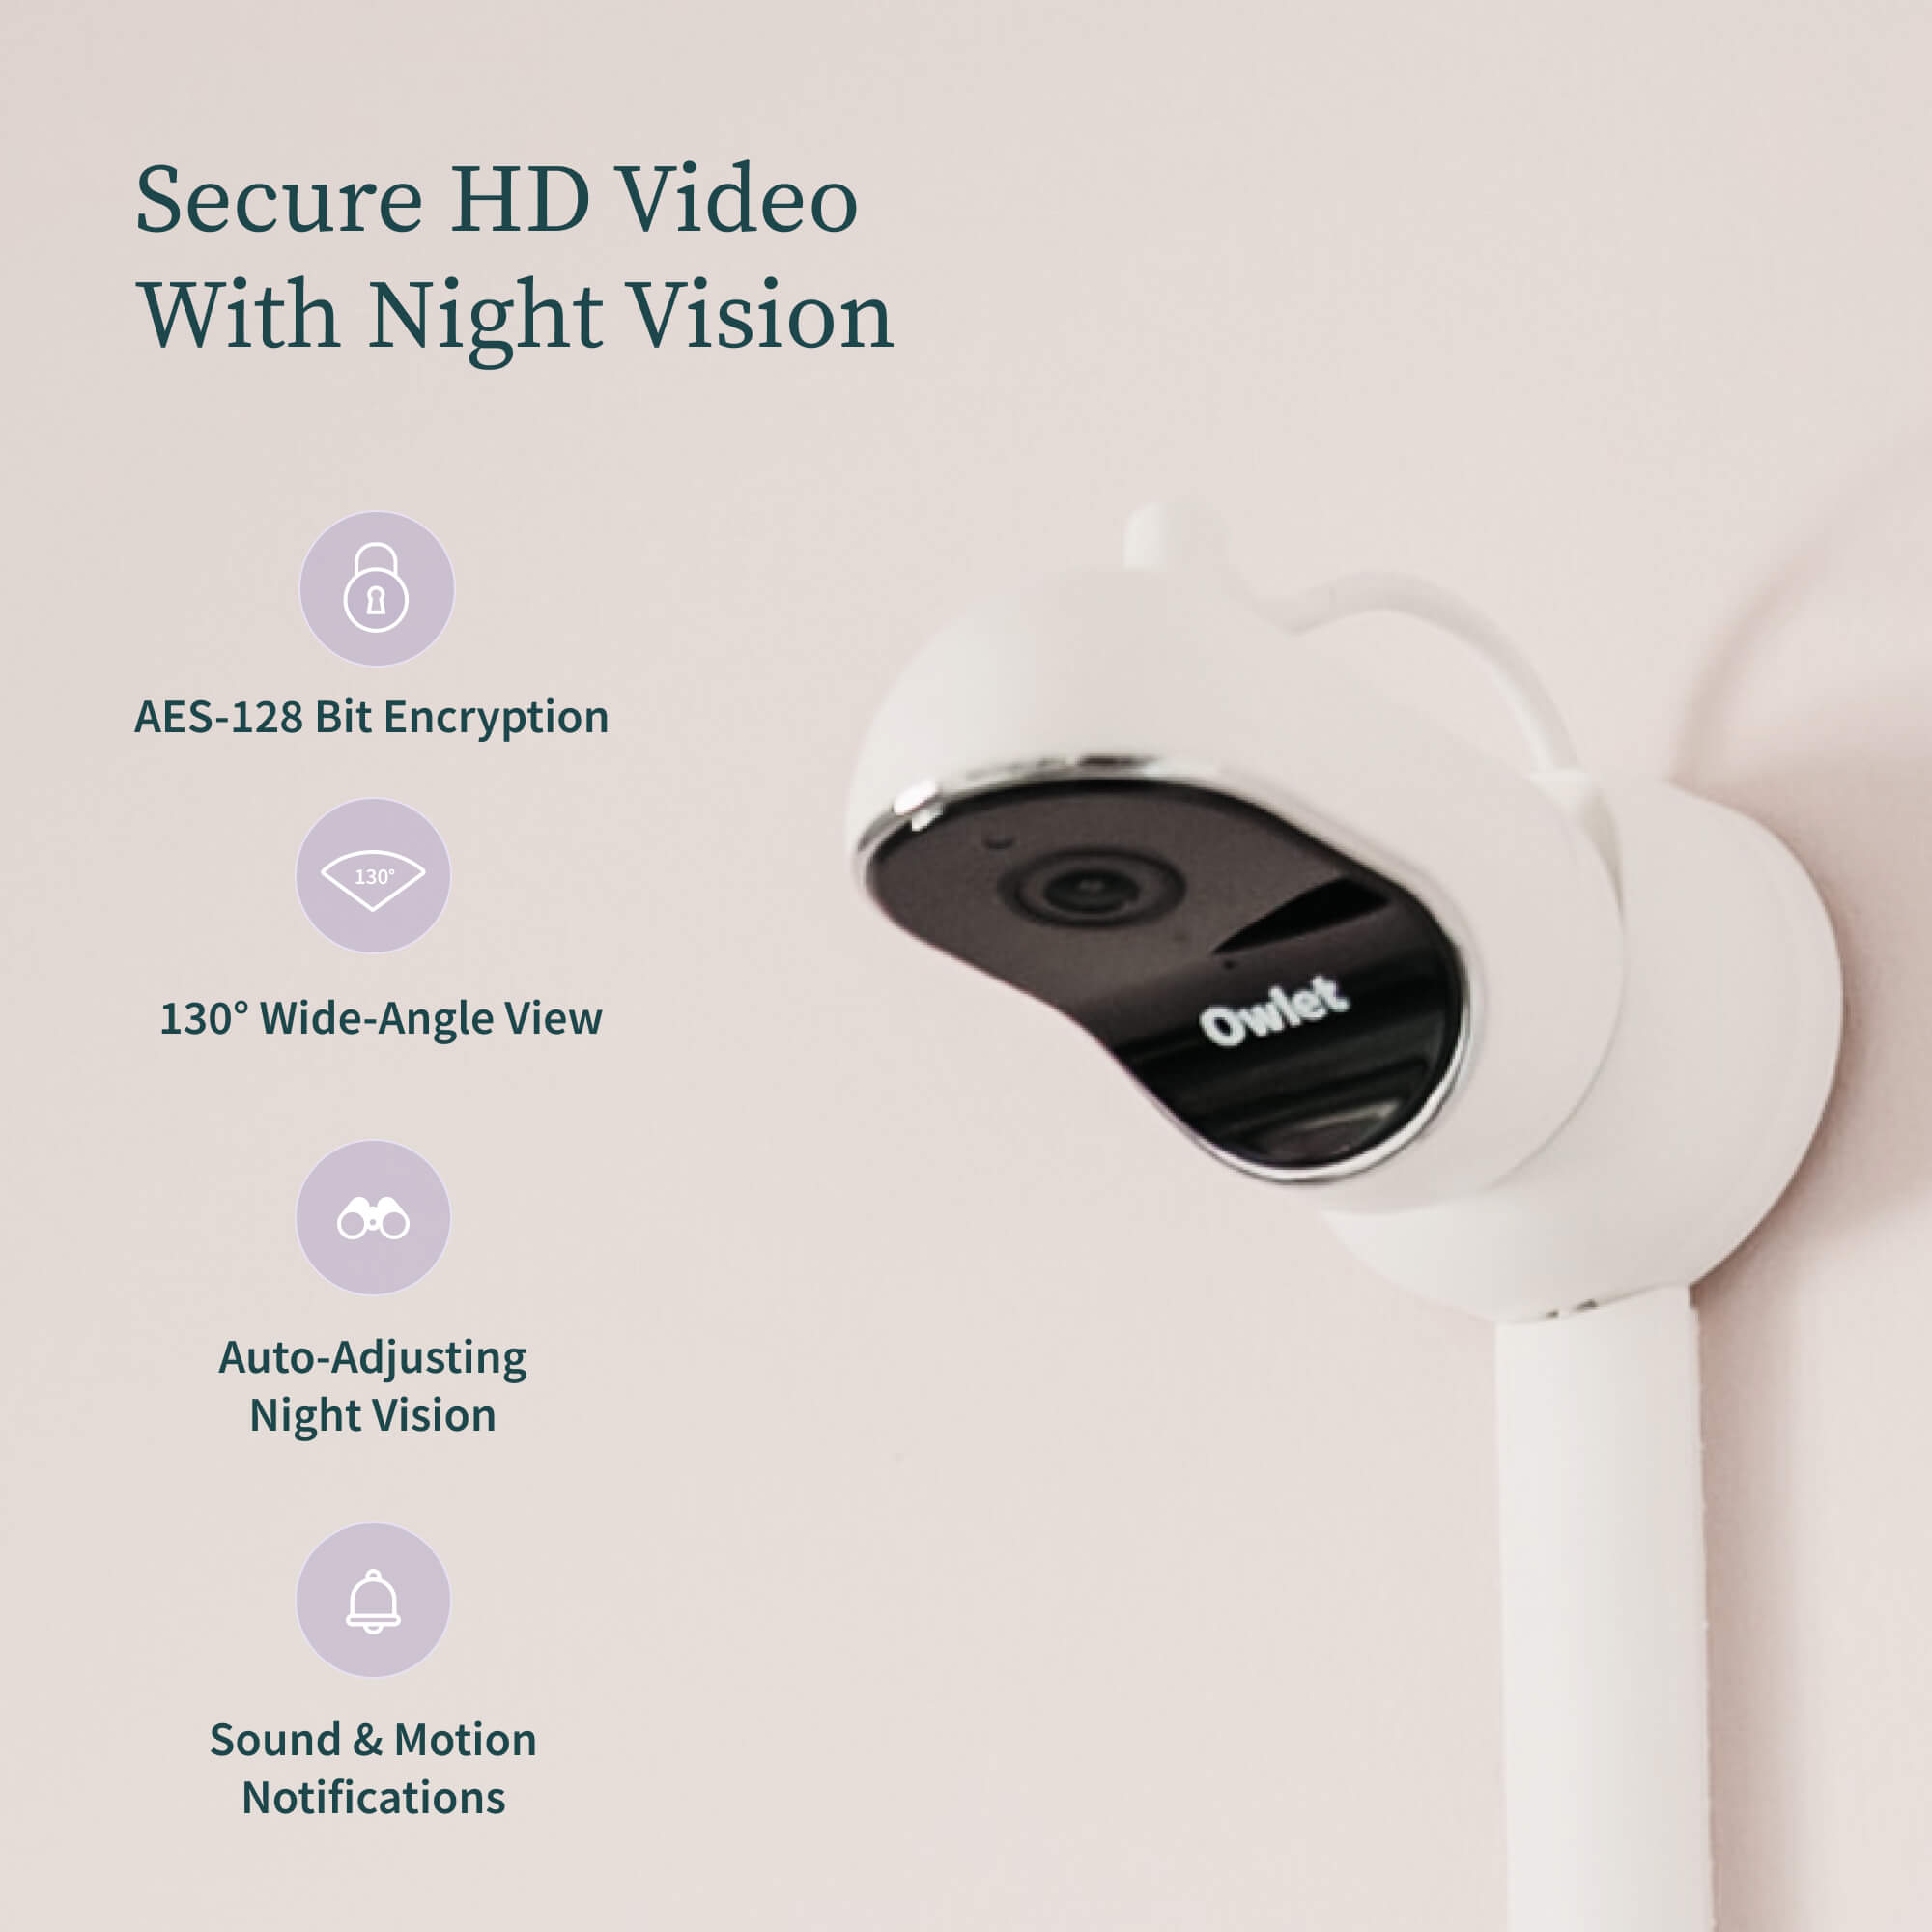 Secure HD video with night vision